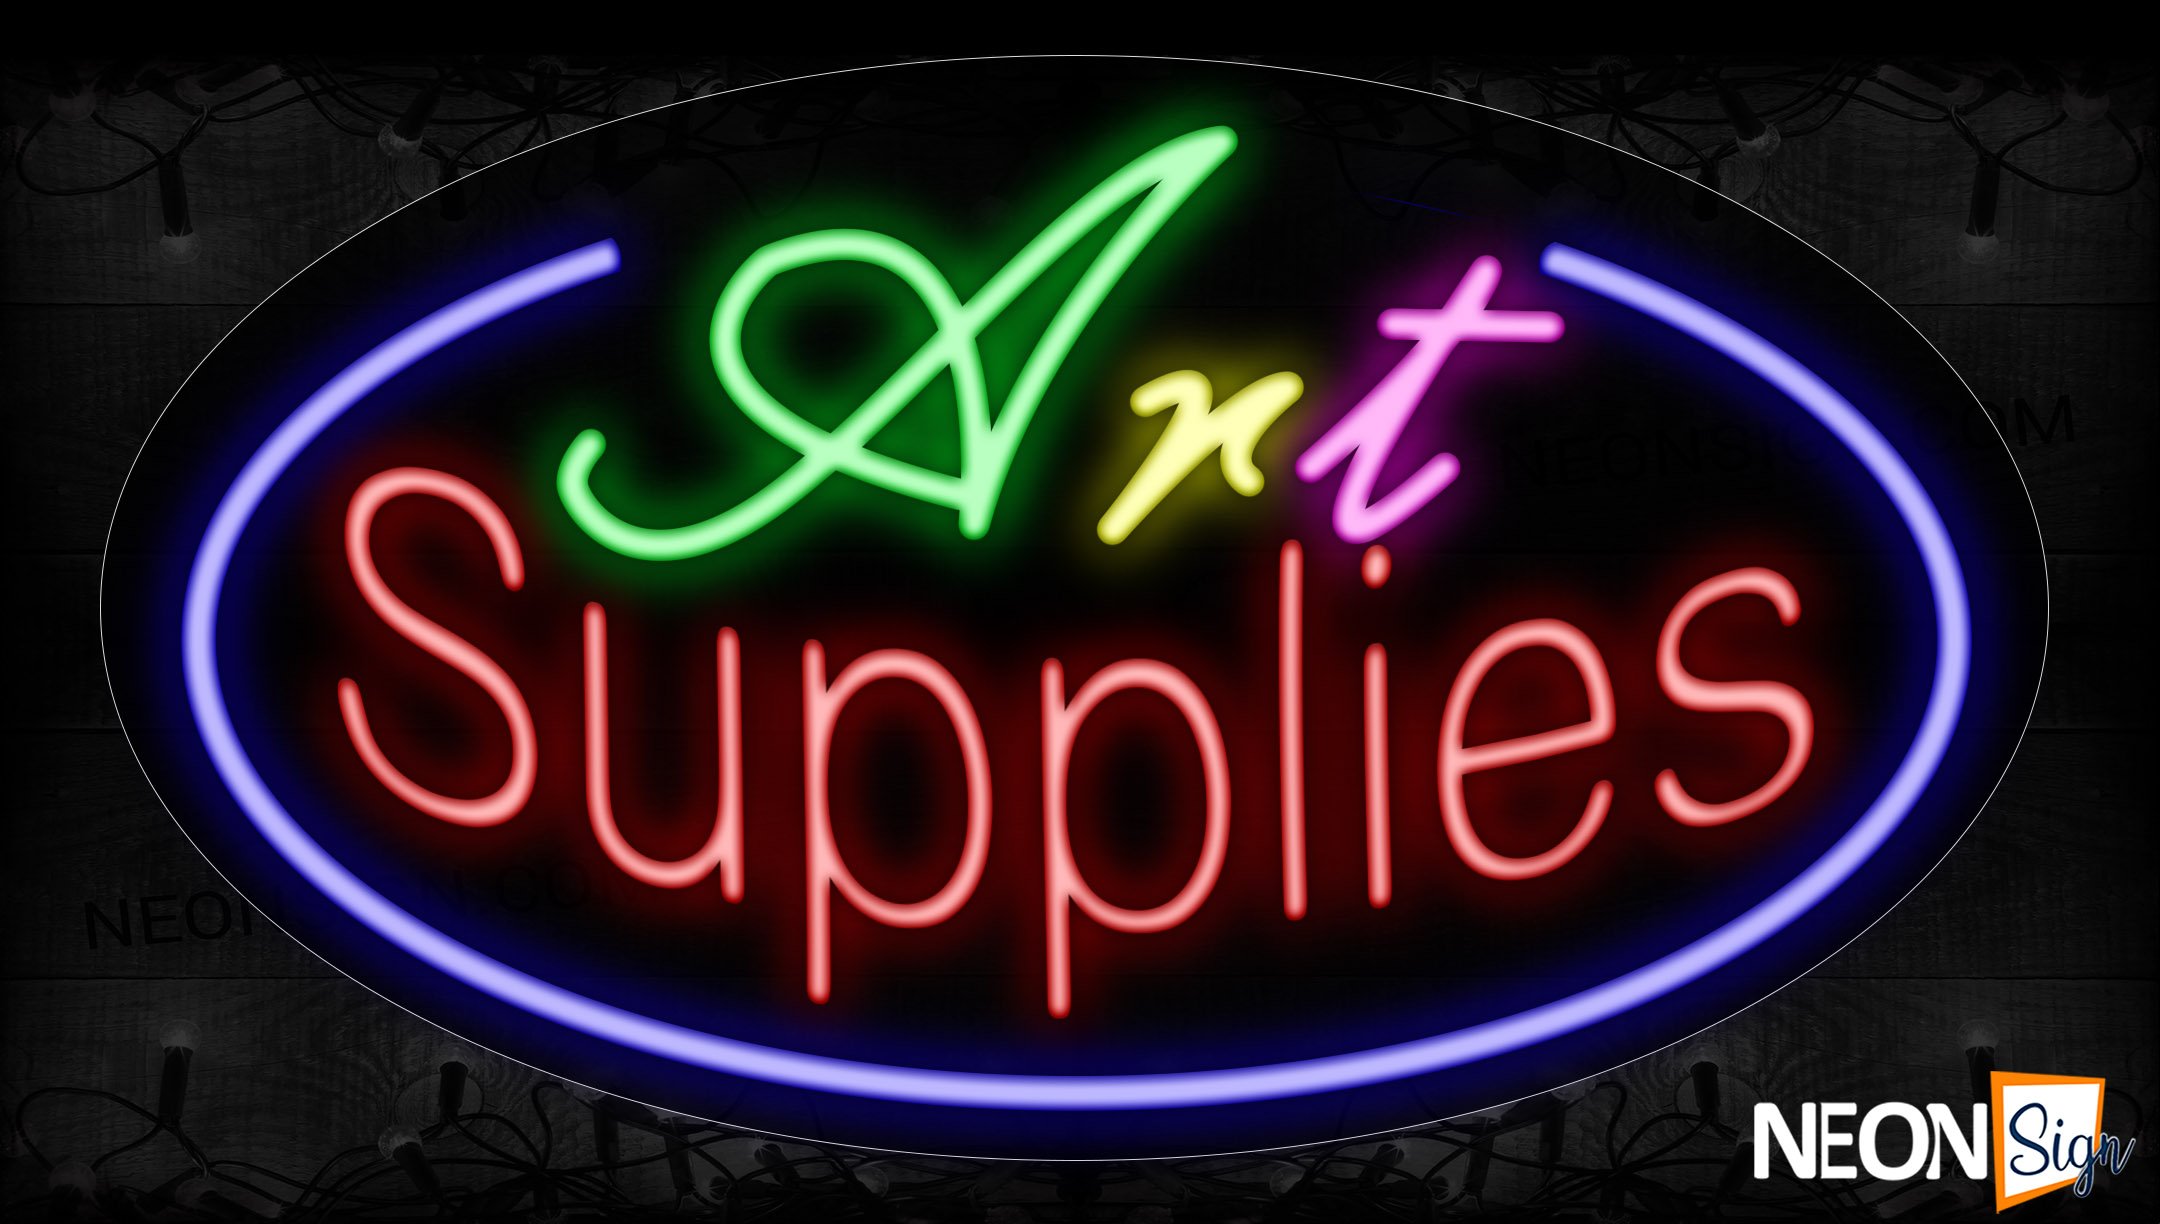 Image of 14379 Art Supplies With Circle Border Neon Signs_17x30 Contoured Black Backing